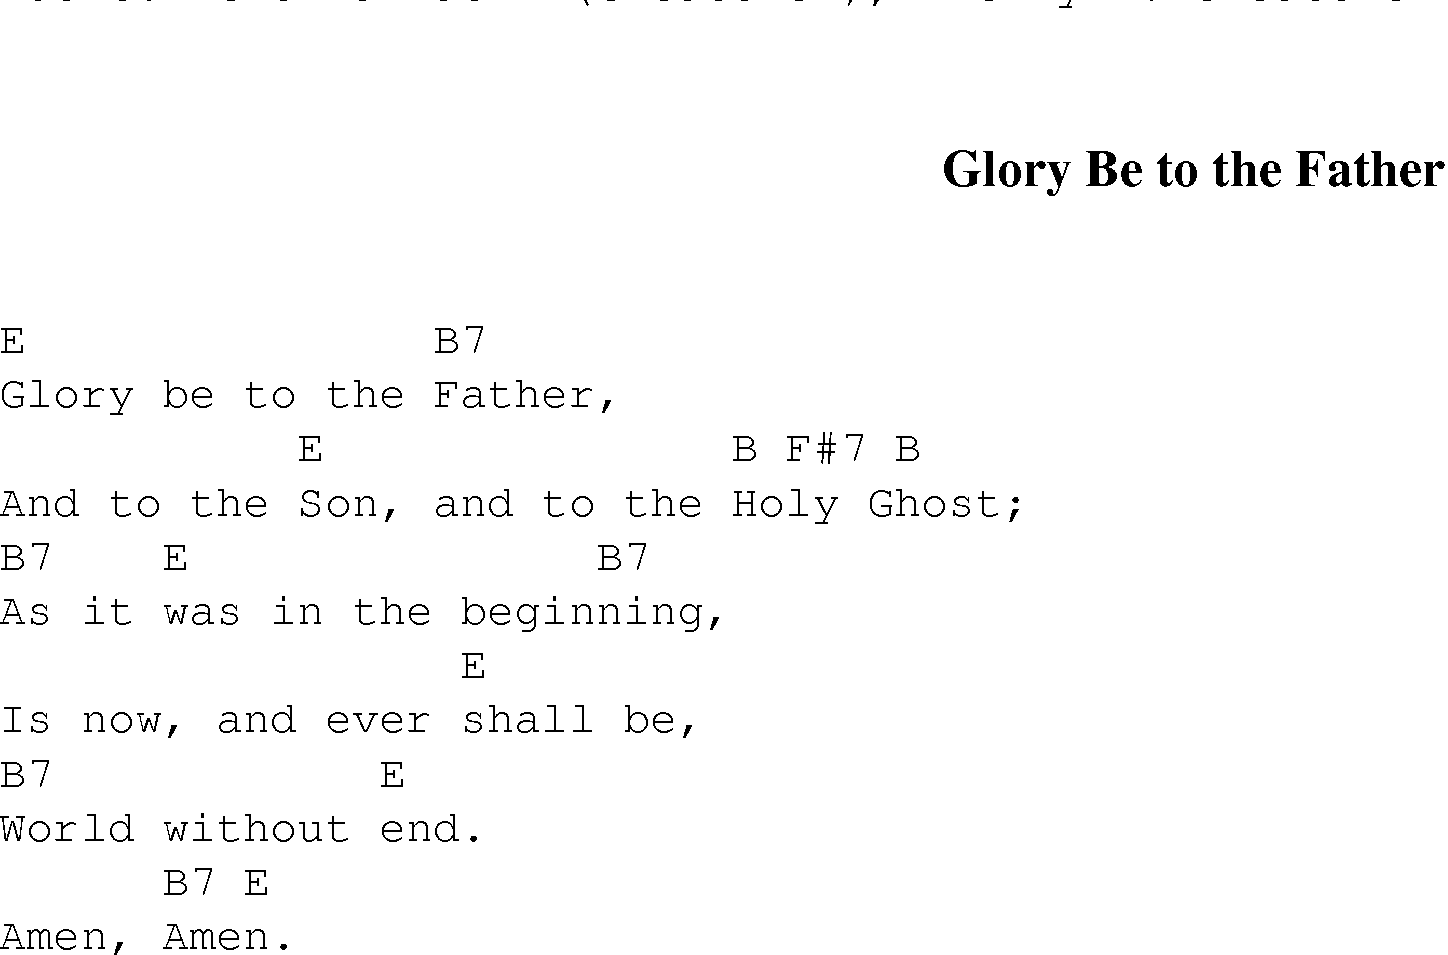 Gospel Song: glory_be_to_the_father, lyrics and chords.